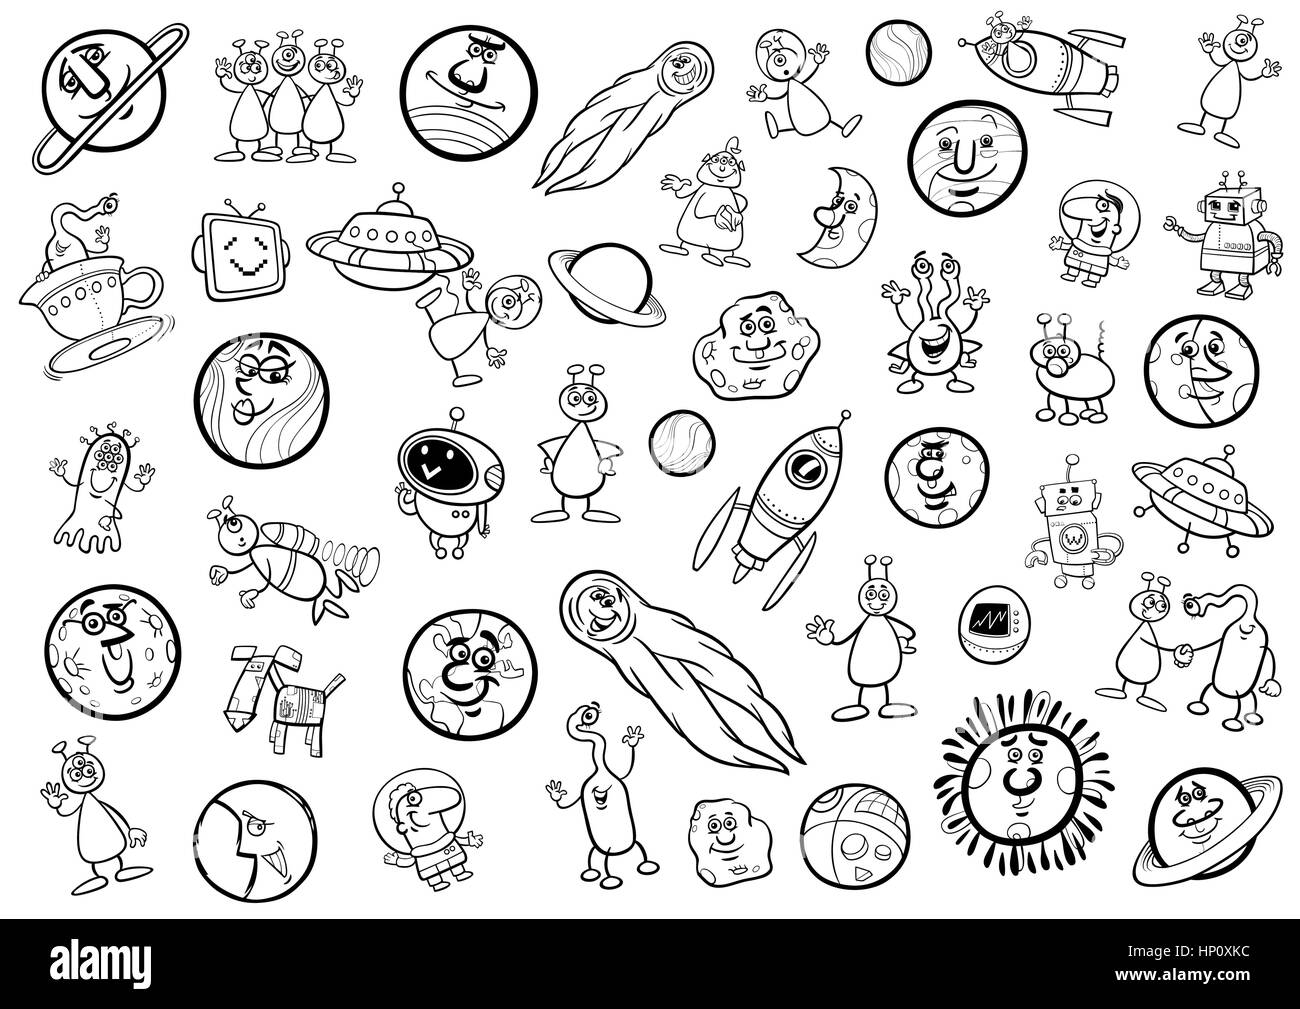 Black and White Cartoon Illustration of Space Objects and Fantasy Characters Set Coloring Page Stock Vector